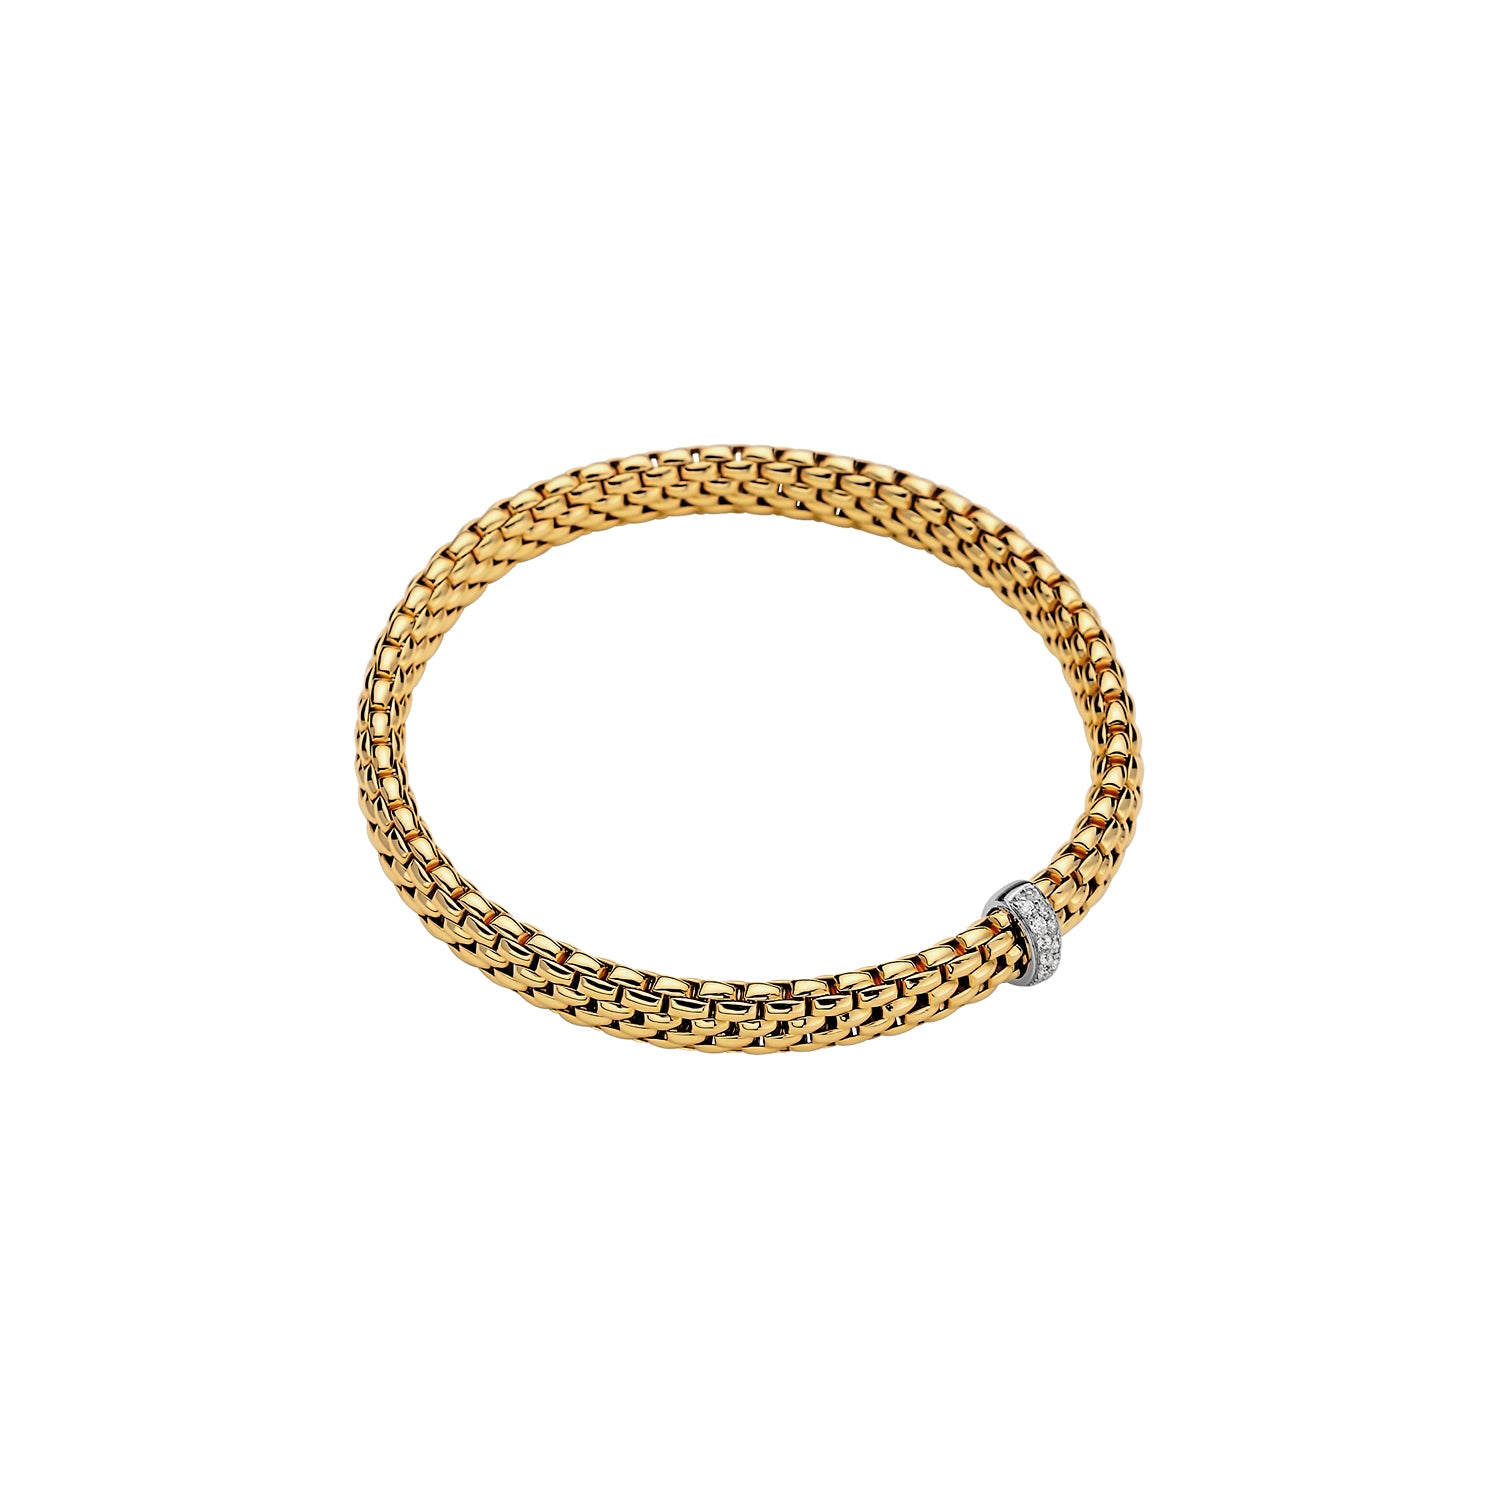 FOPE Bracelet 18K yellow gold with diamonds 0.10ct Size Small VENDOME